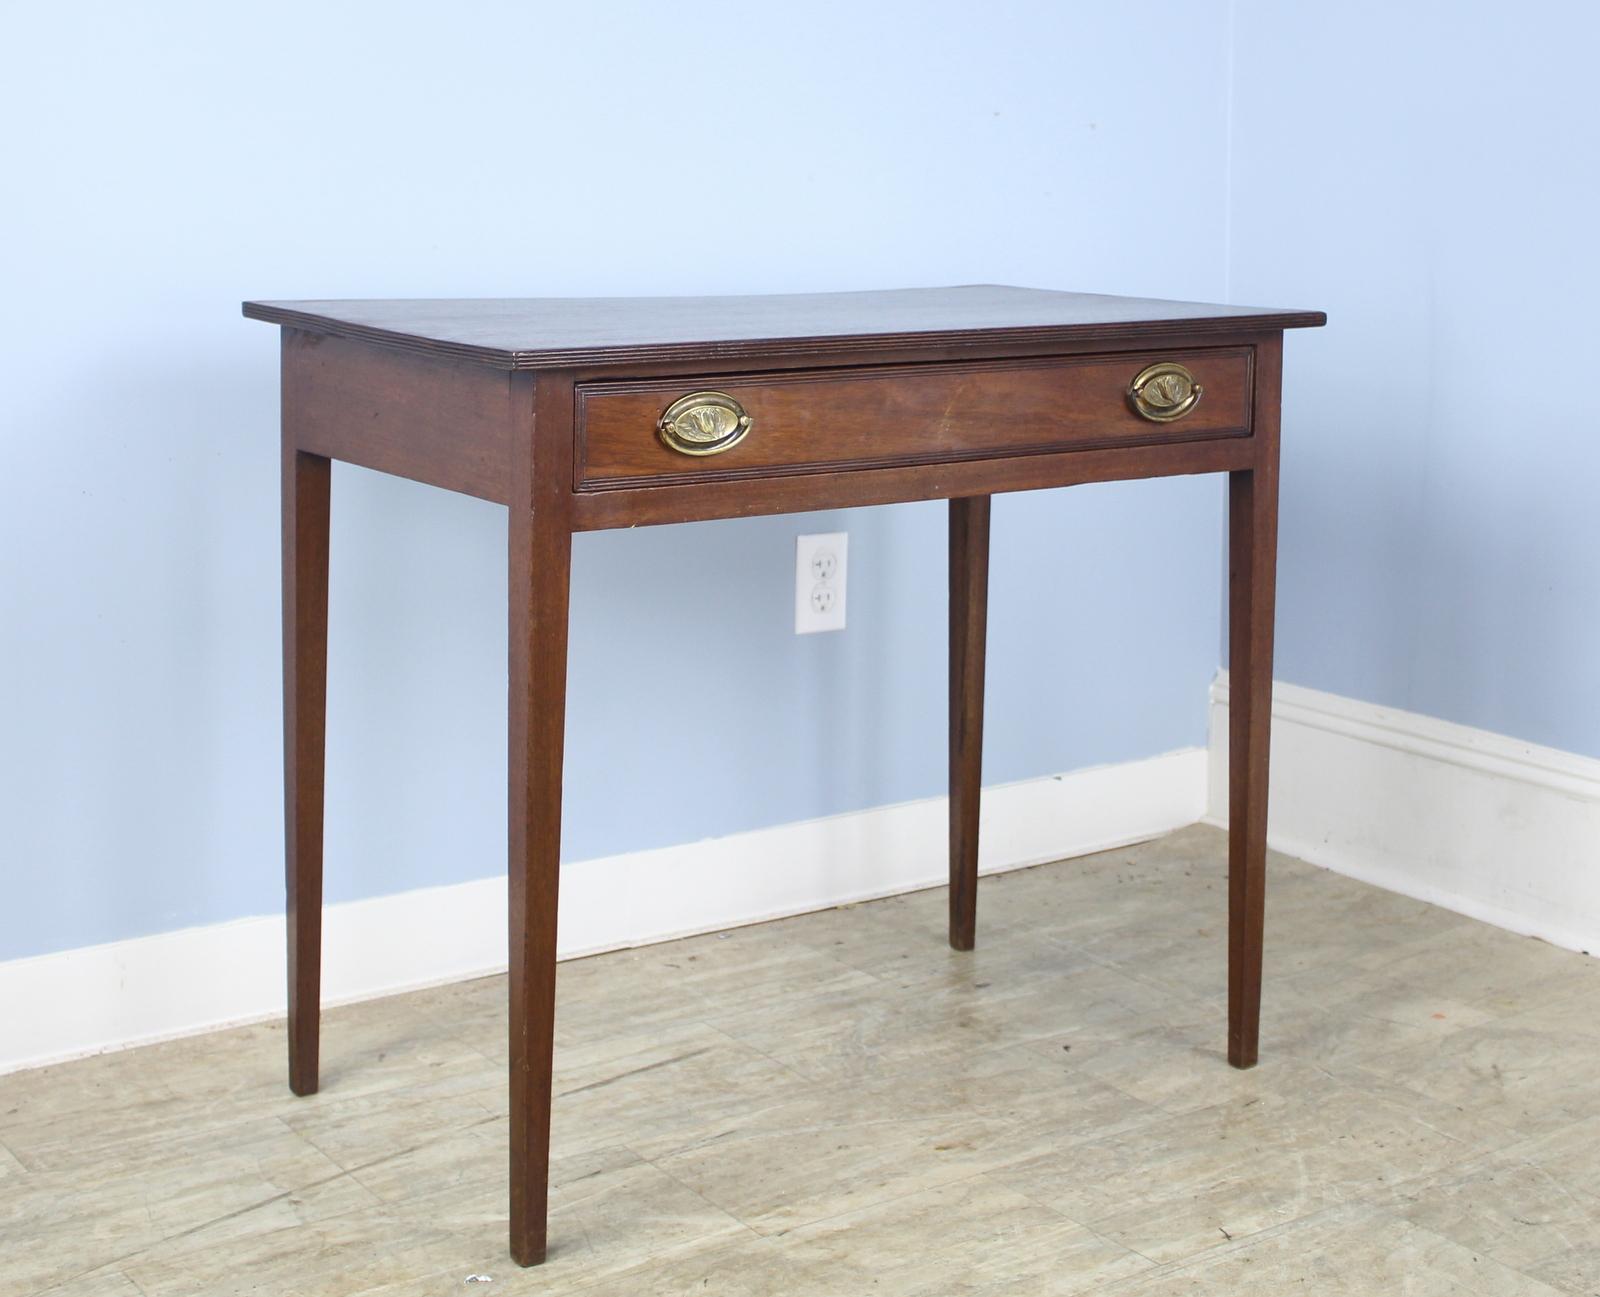 An antique occasional table from England. Classic Georgian shape. Mahogany with a rich grain and patina. One wide drawer with classic brass handles under reeded edge. Would make a suitable lamp table. Top has been lightly refinished.